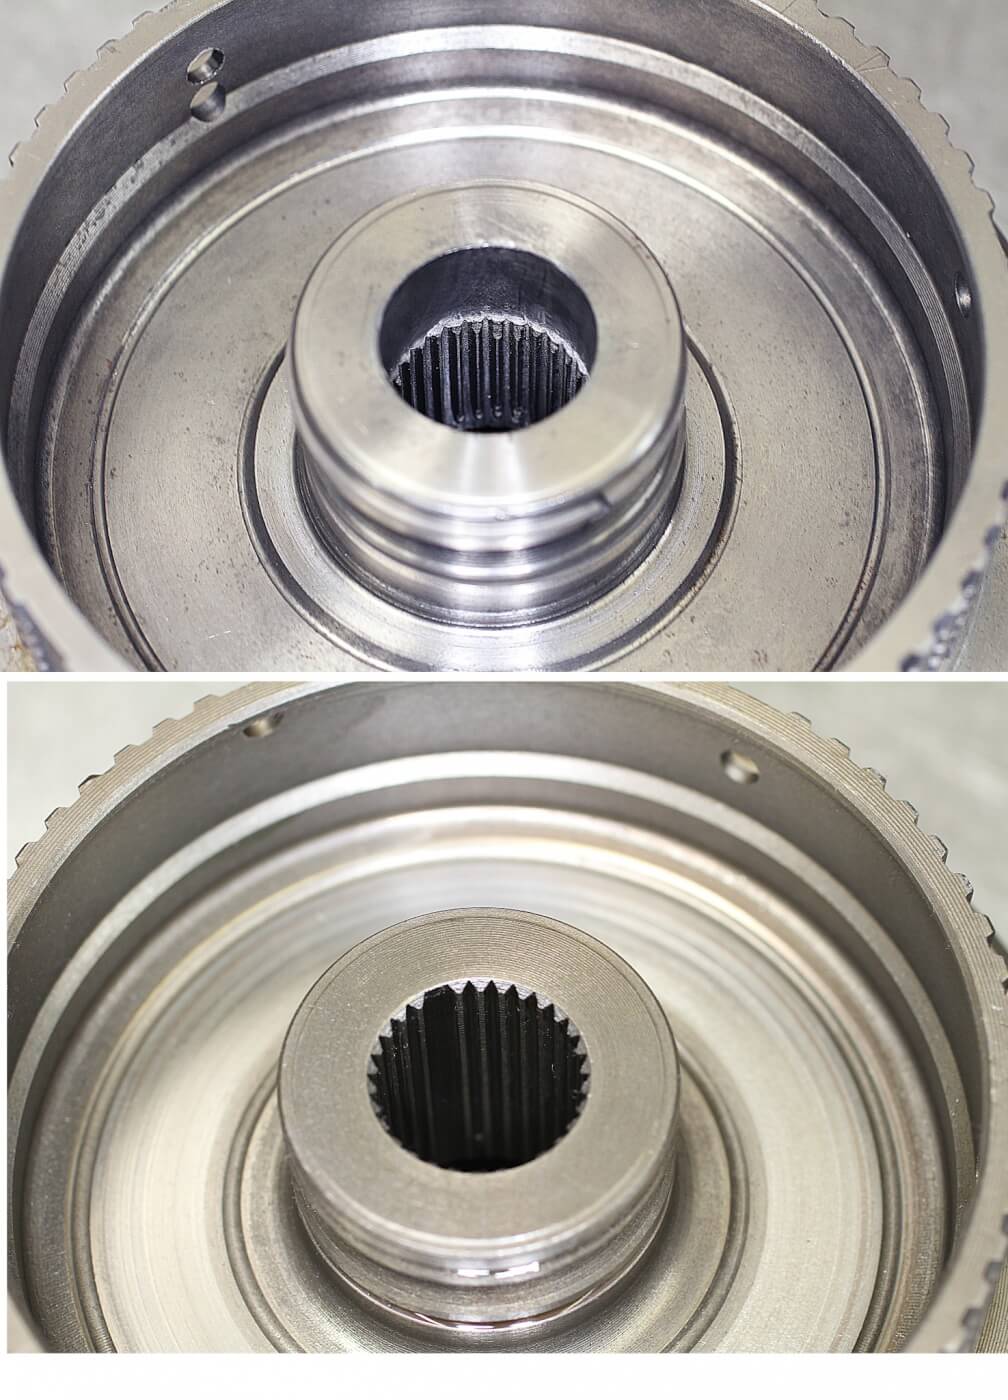 6. This is the forward clutch drum, and it is used in all 4 forward gears. There are two styles; one has less spline engagement (top). Remac checks the spline for wear and replaces the clutch drum as needed. They also upgrade the unit to the full spline style (bottom) if yours is a half-spline style for more durability and longevity. 